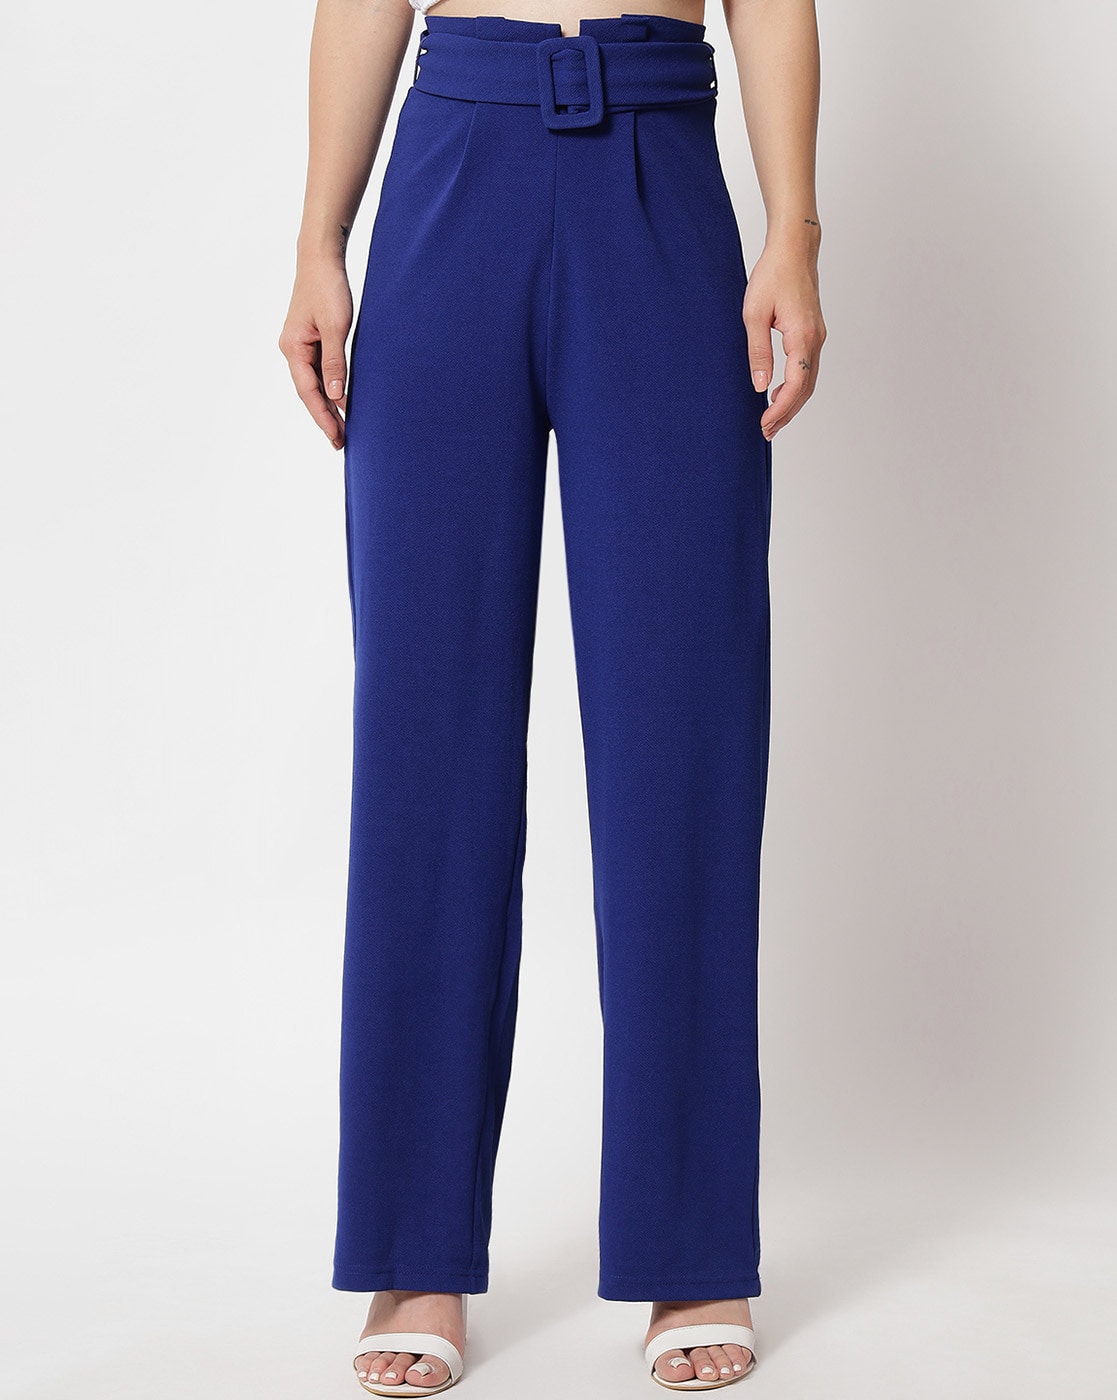 YAS trousers with side zip detail in navy  ASOS